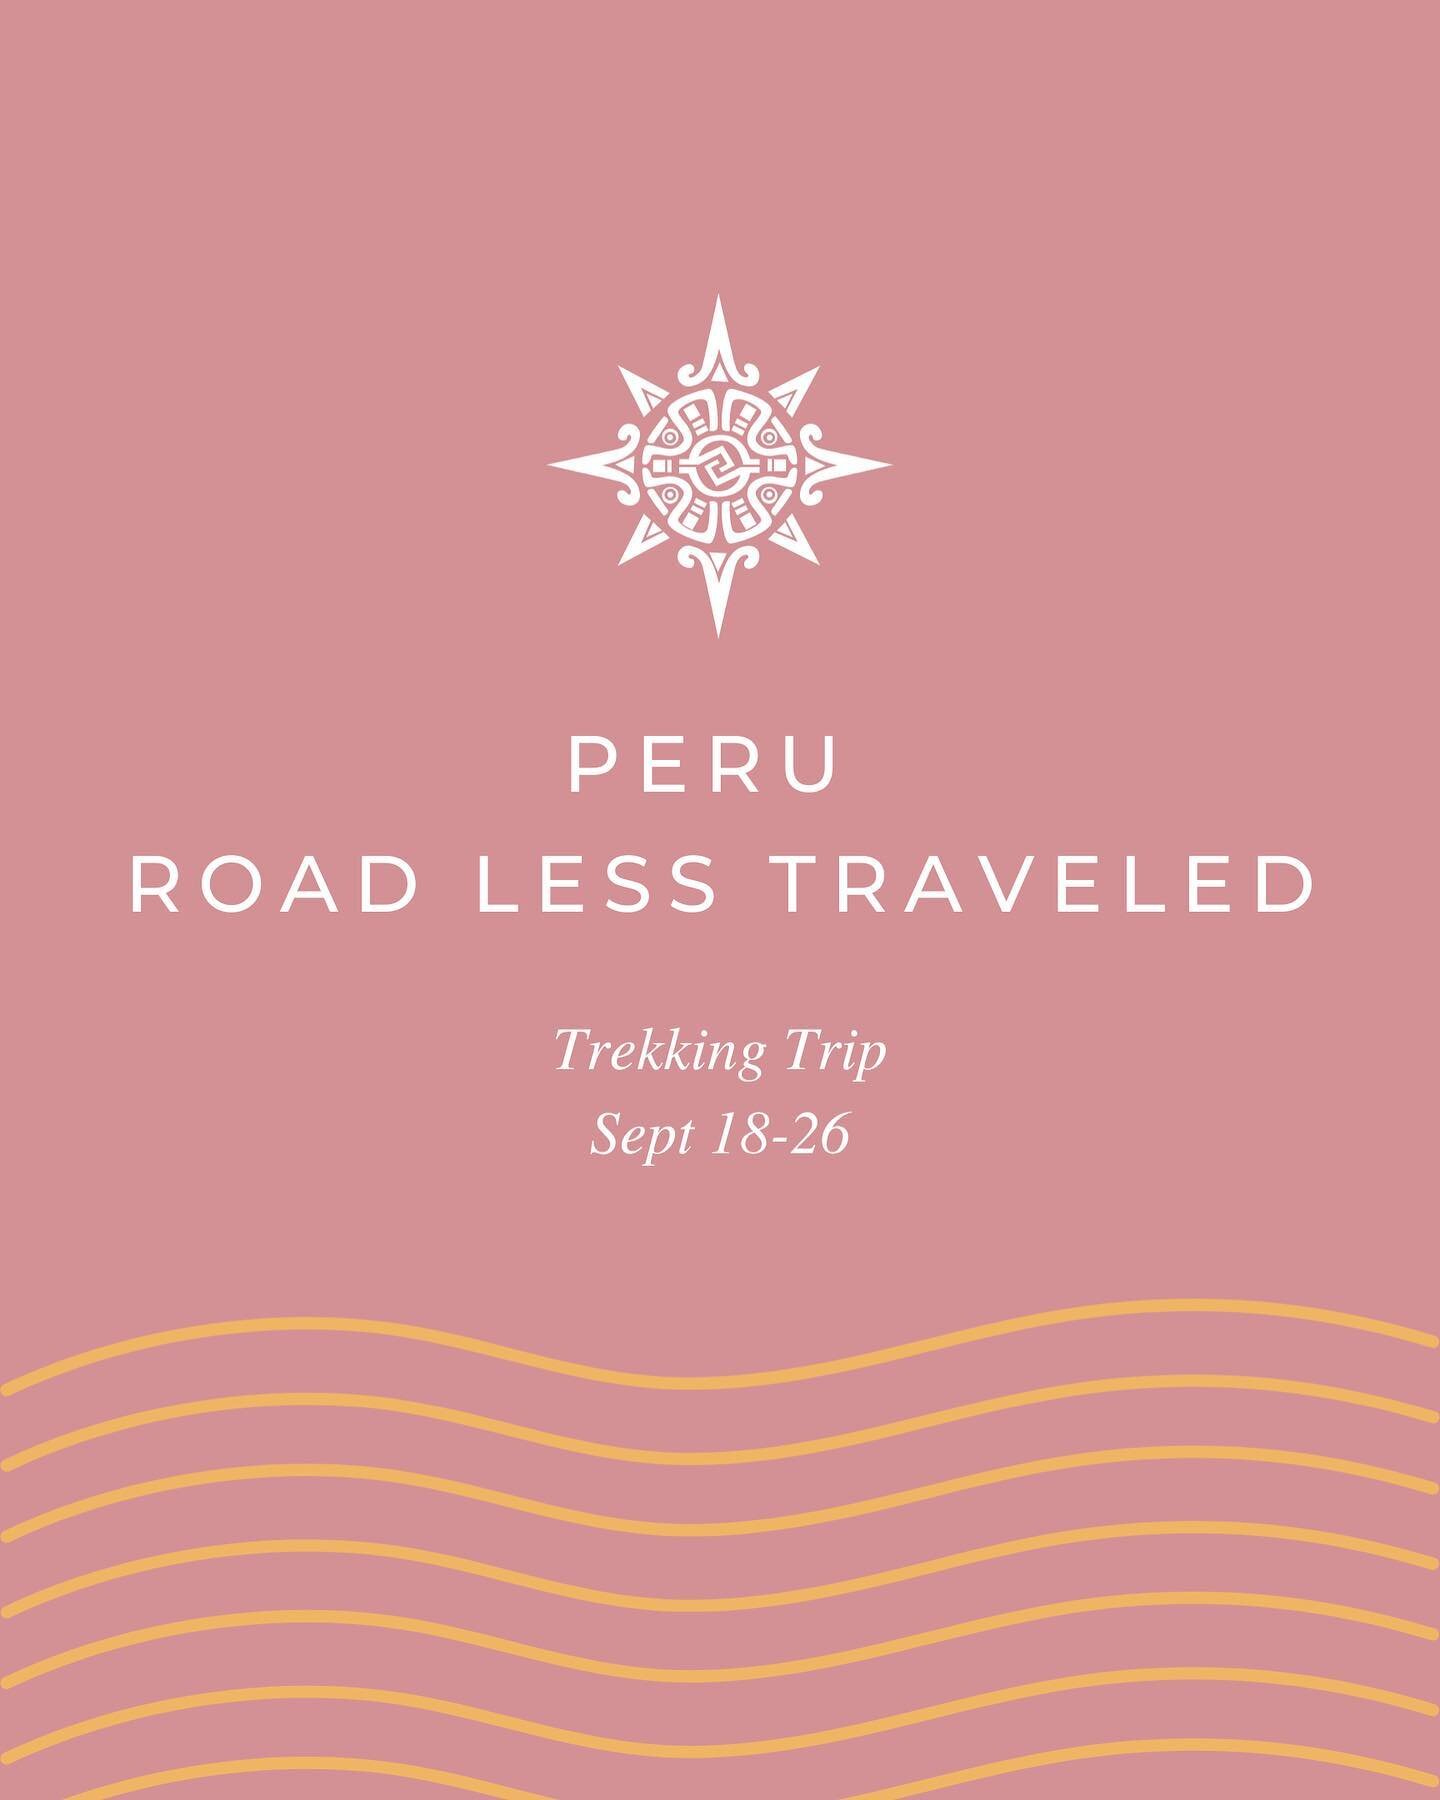 Join our LIVE on June 5th at 5:30pm PST / 8:30pm EST to learn more about this unique Peru experience from our Leads.

Why learn more?:

We&rsquo;ll challenge our endurance while we soak in the magic of Andes - but the cherry on top is our mindful tra